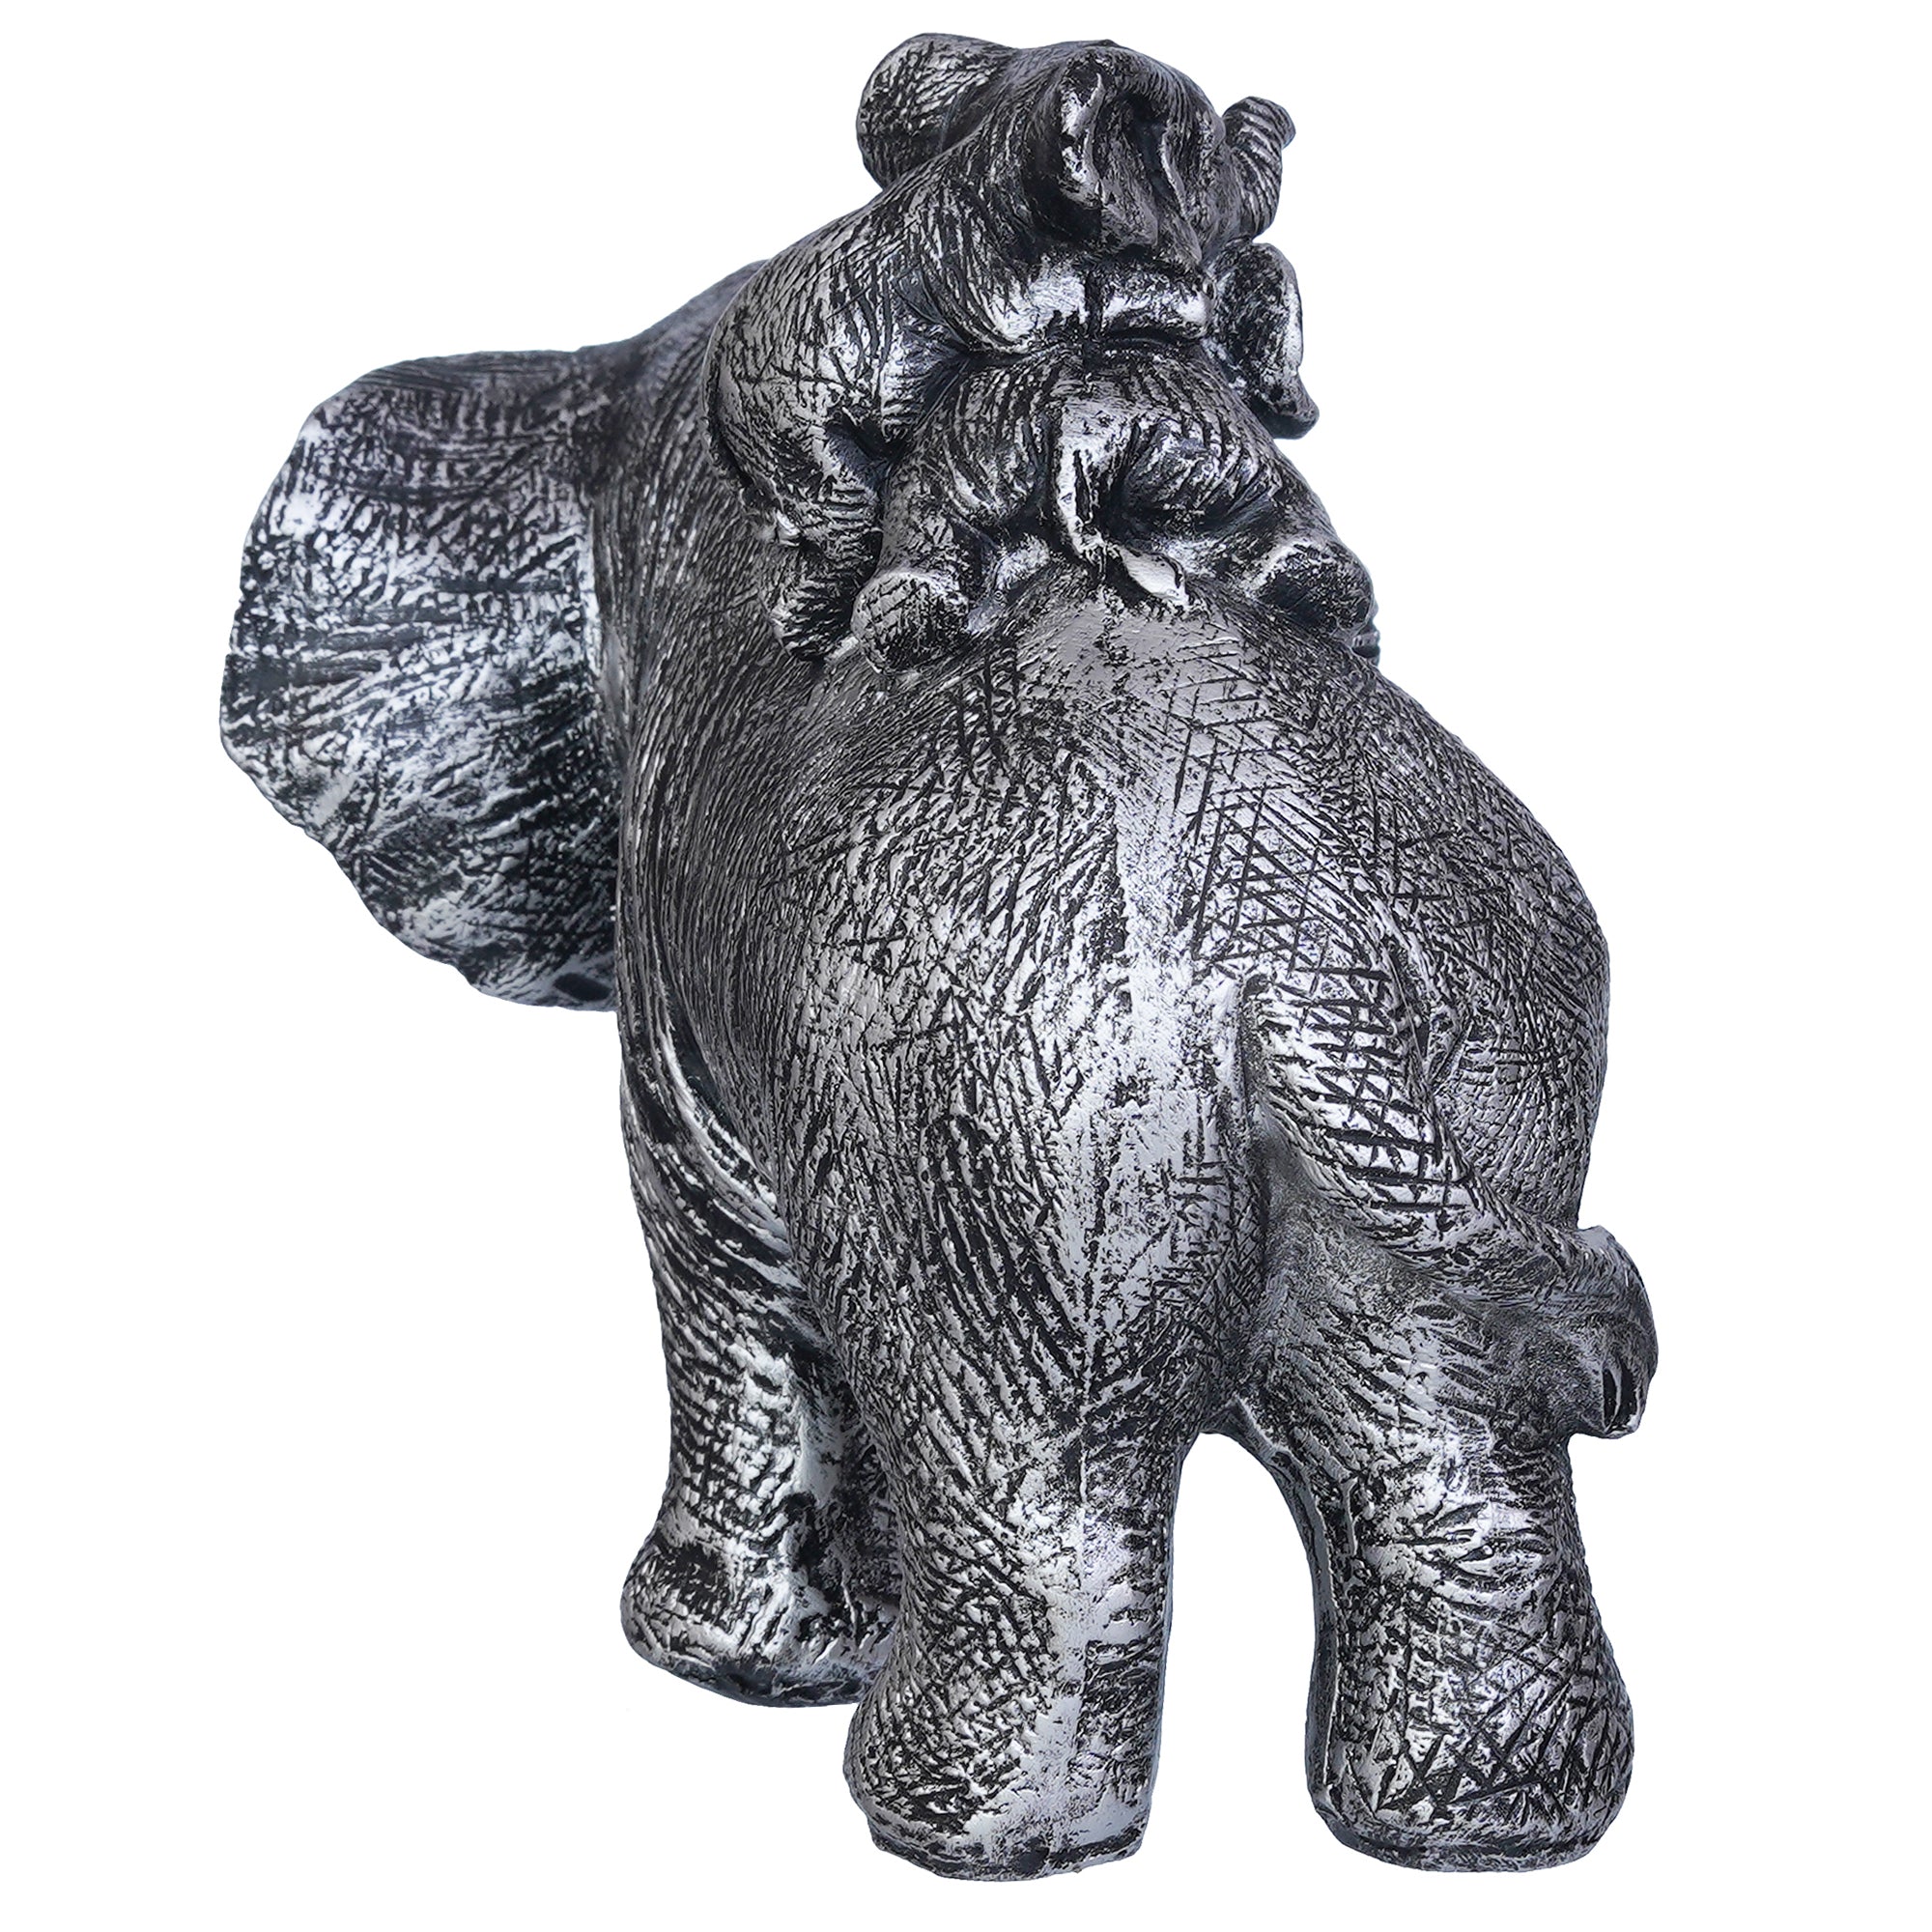 Polyresin Elephant Statue with Baby Elephant on his Back Decorative Showpiece 8